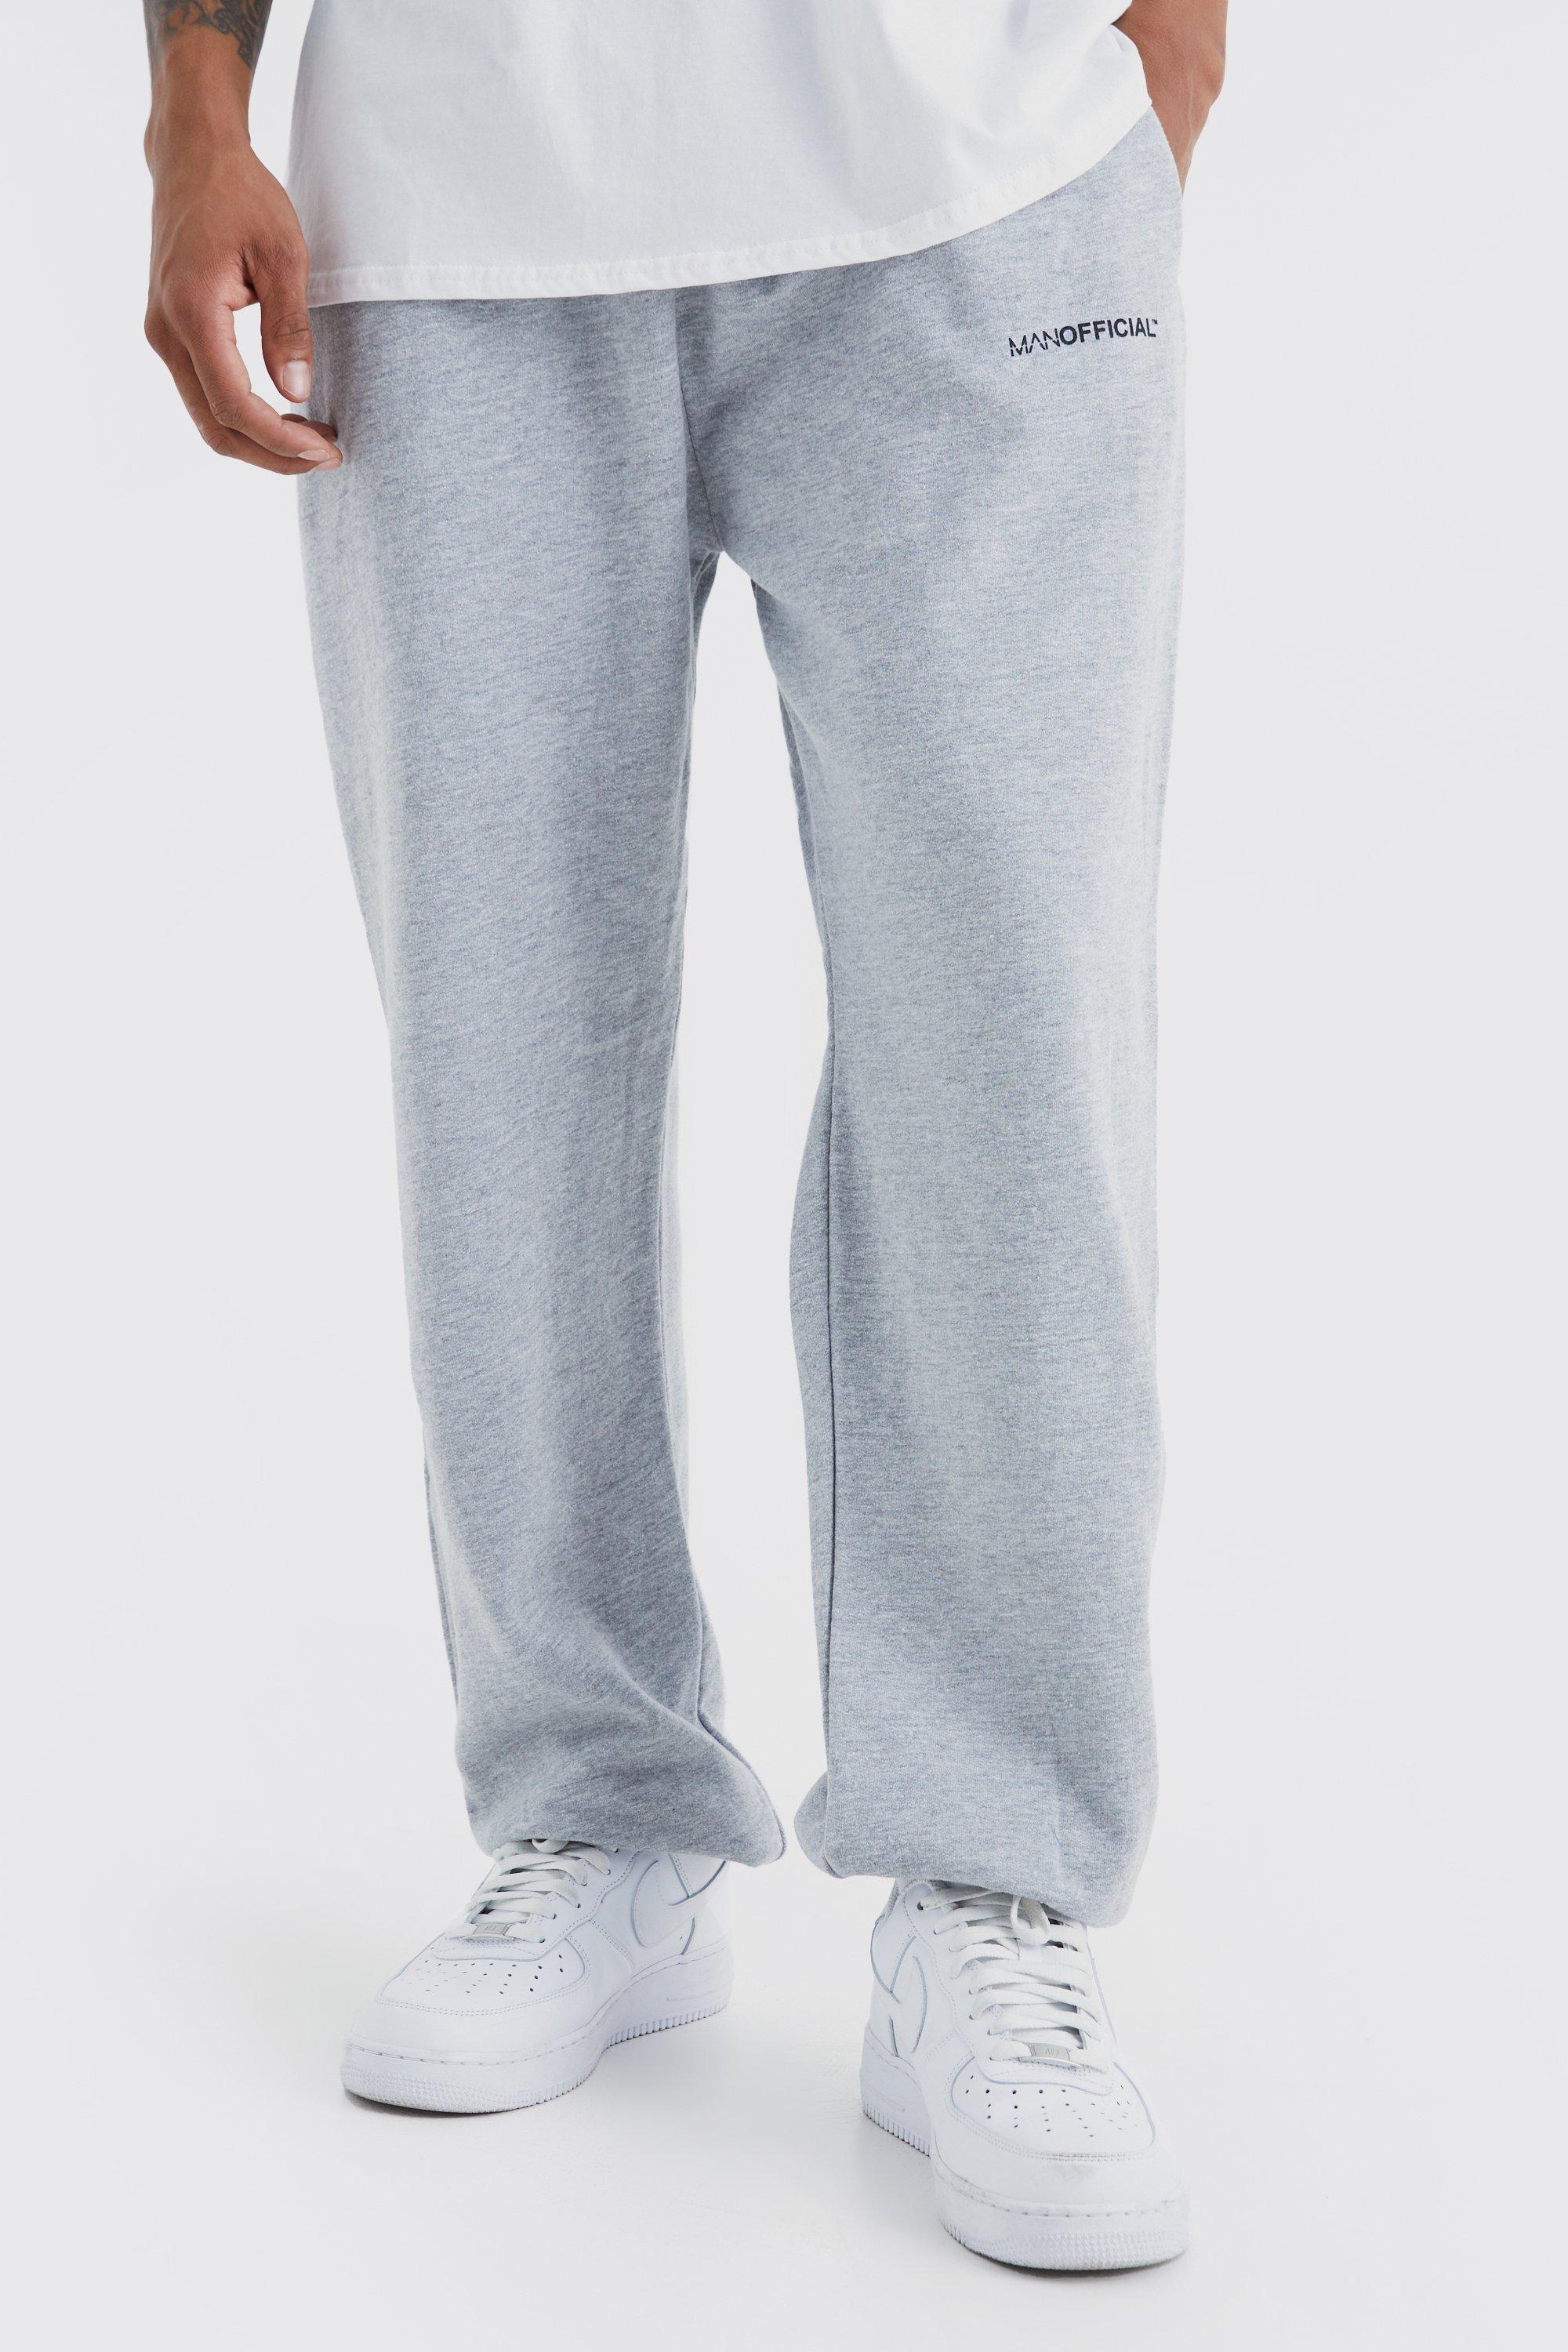 Mens Grey Man Official Oversized Joggers, Grey